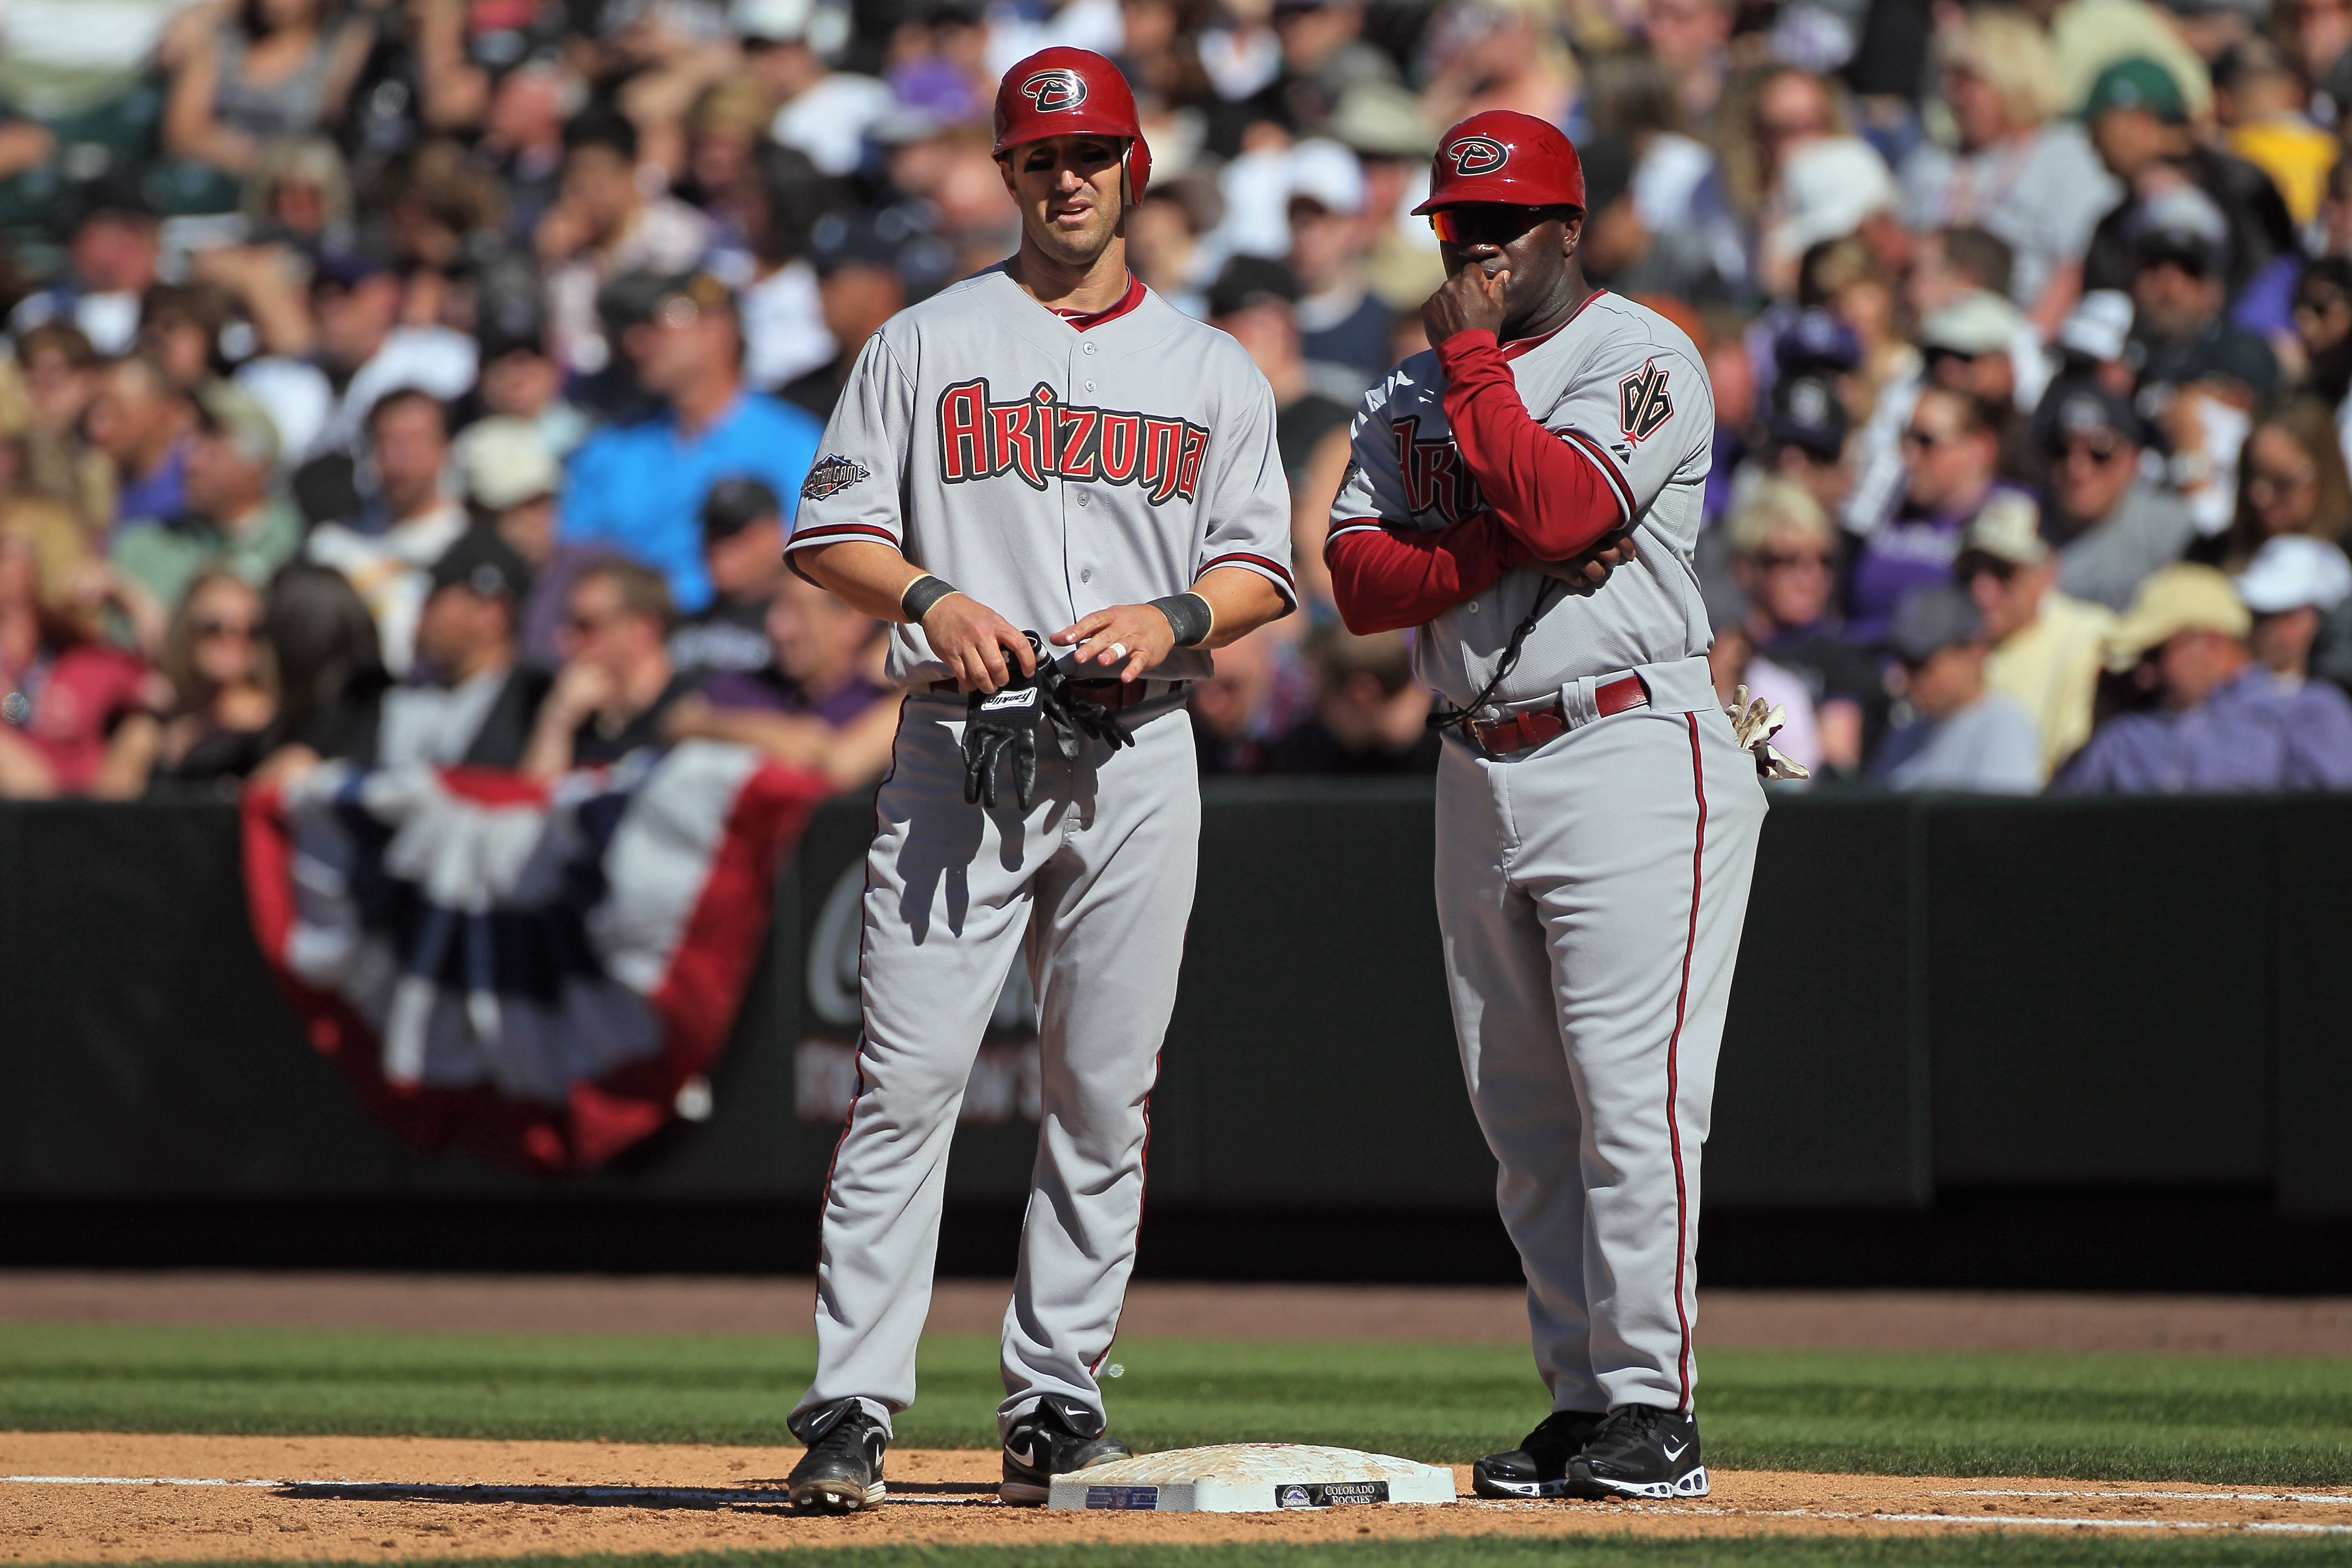 DENVER, CO - APRIL 01:  Firstbase coach Eric Young  of the Arizona Diamondbacks directs Willie Bloomquist #18 of the Arizona Diamondbacks against the Colorado Rockies during Opening Day at Coors Field on April 1, 2011 in Denver, Colorado. The Diamondbacks